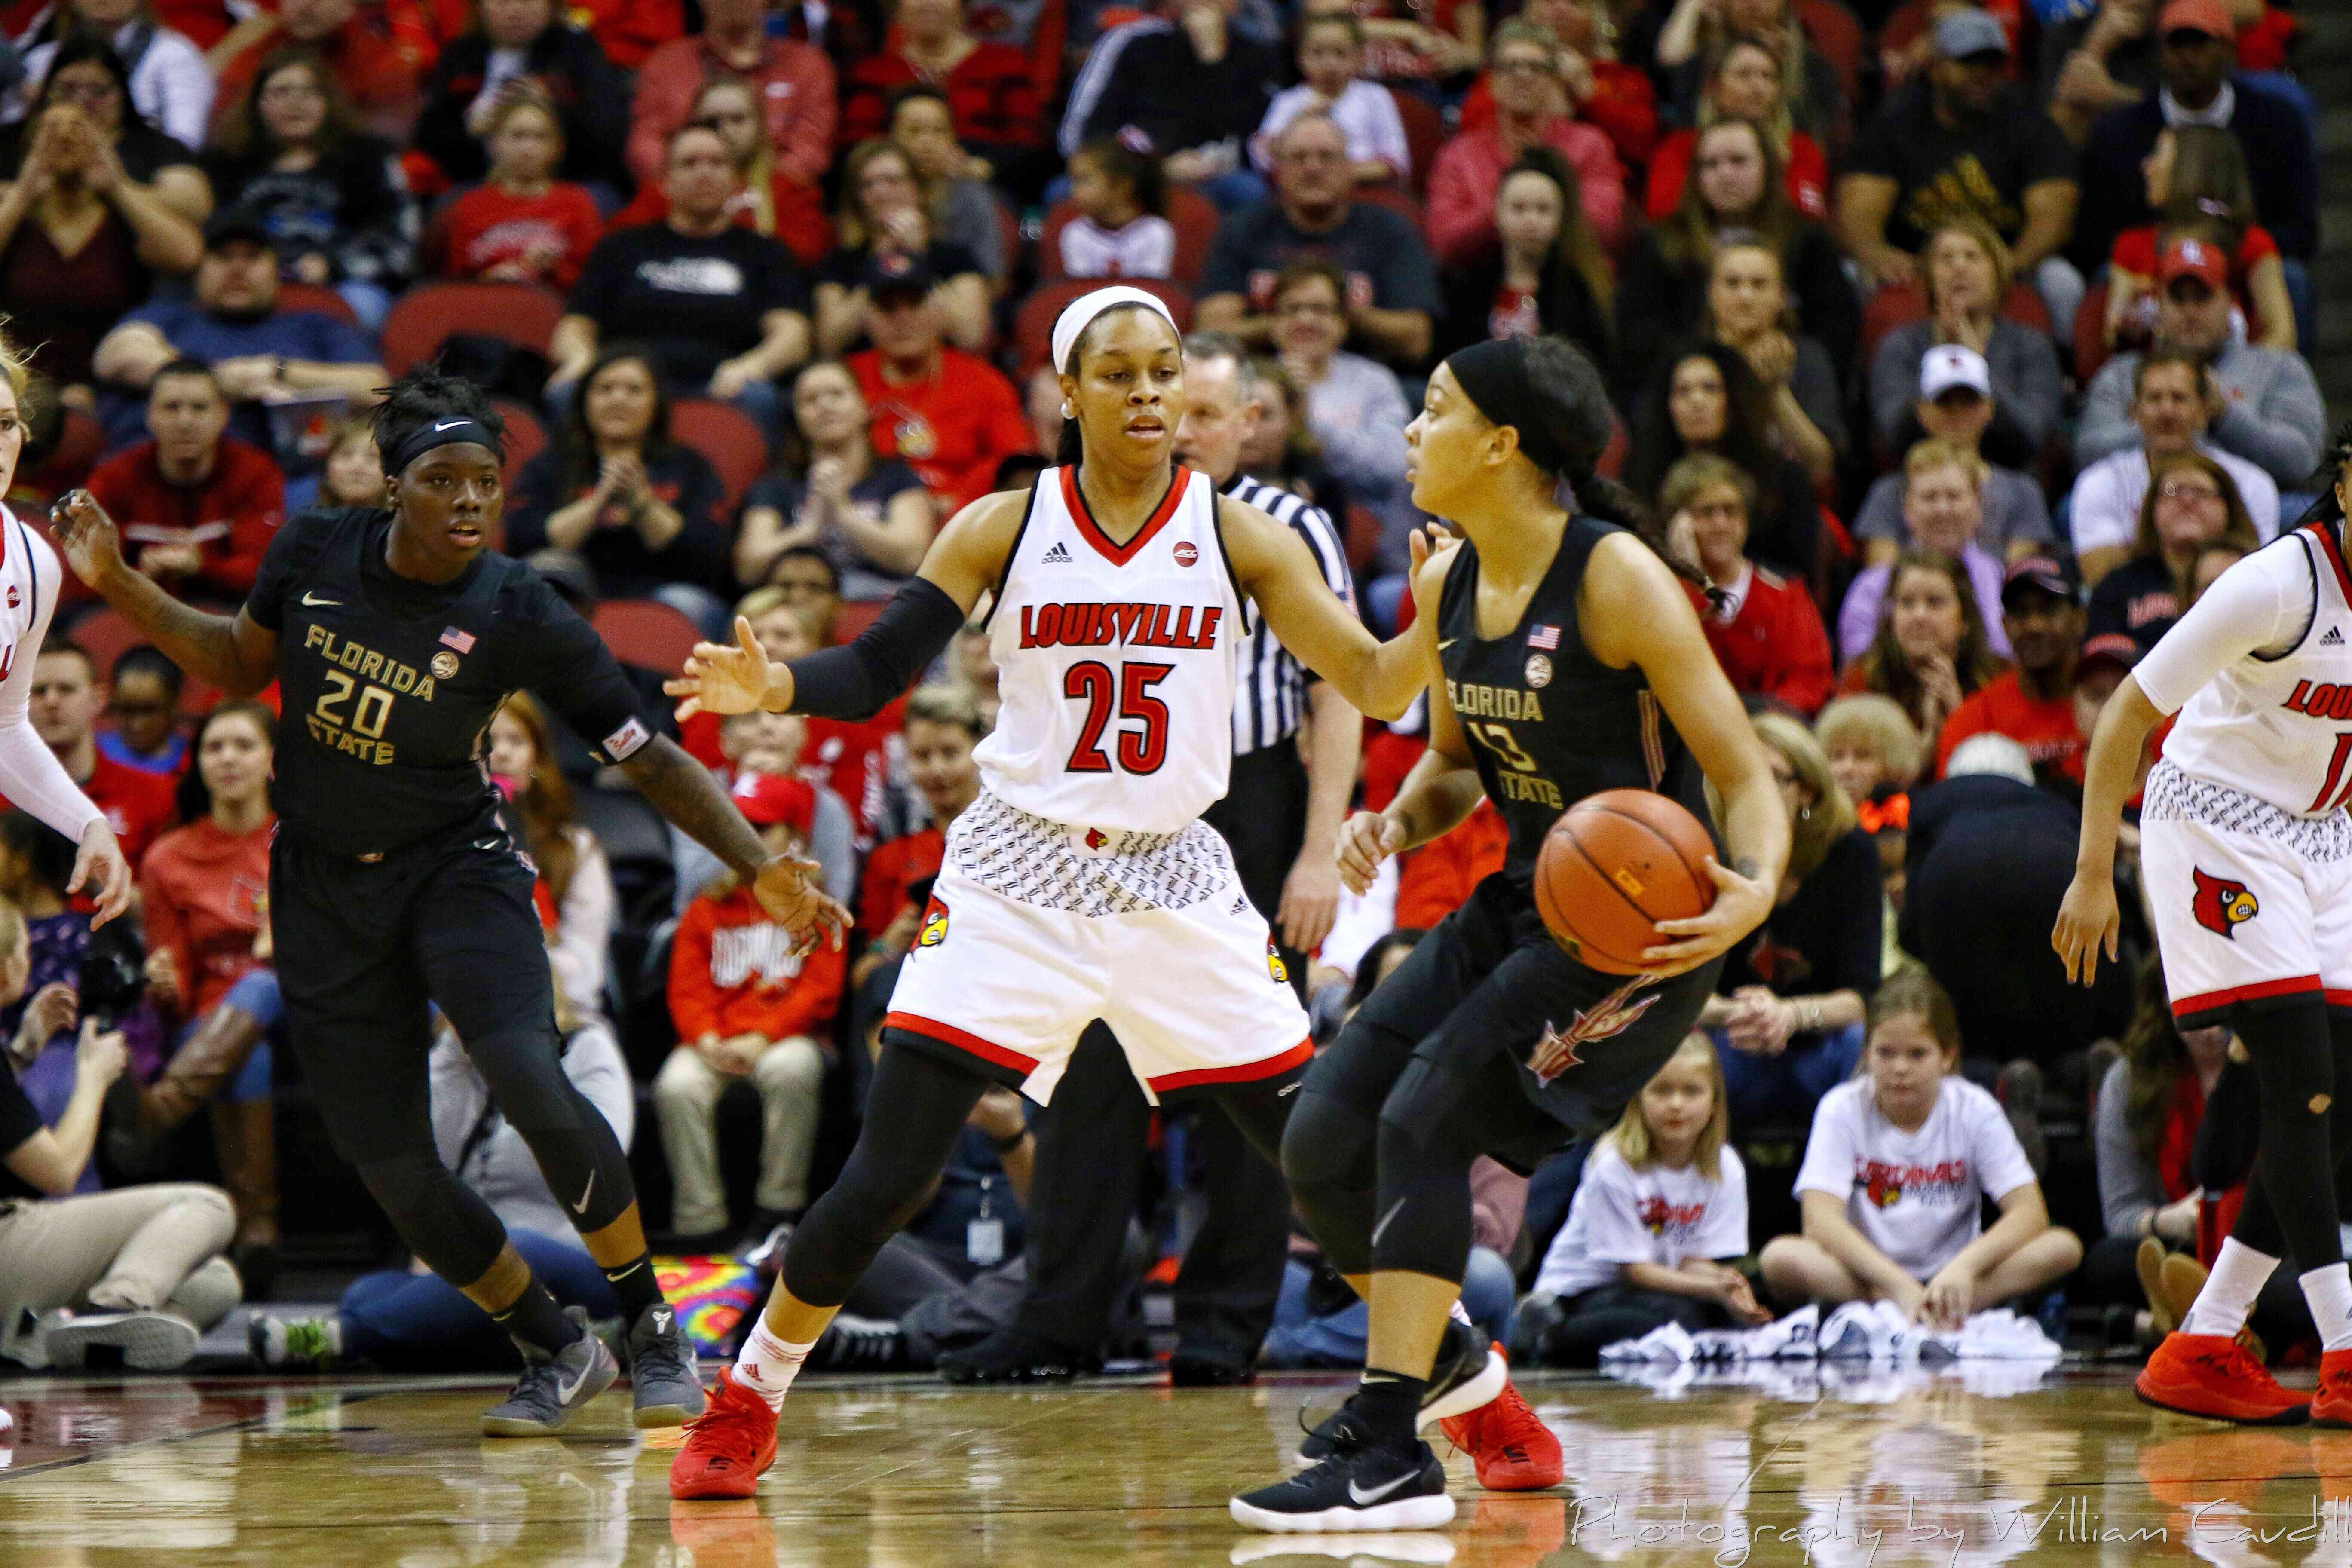 Louisville Women’s Basketball Hosts Wake Forest TODAY at 1:00 – The Crunch Zone